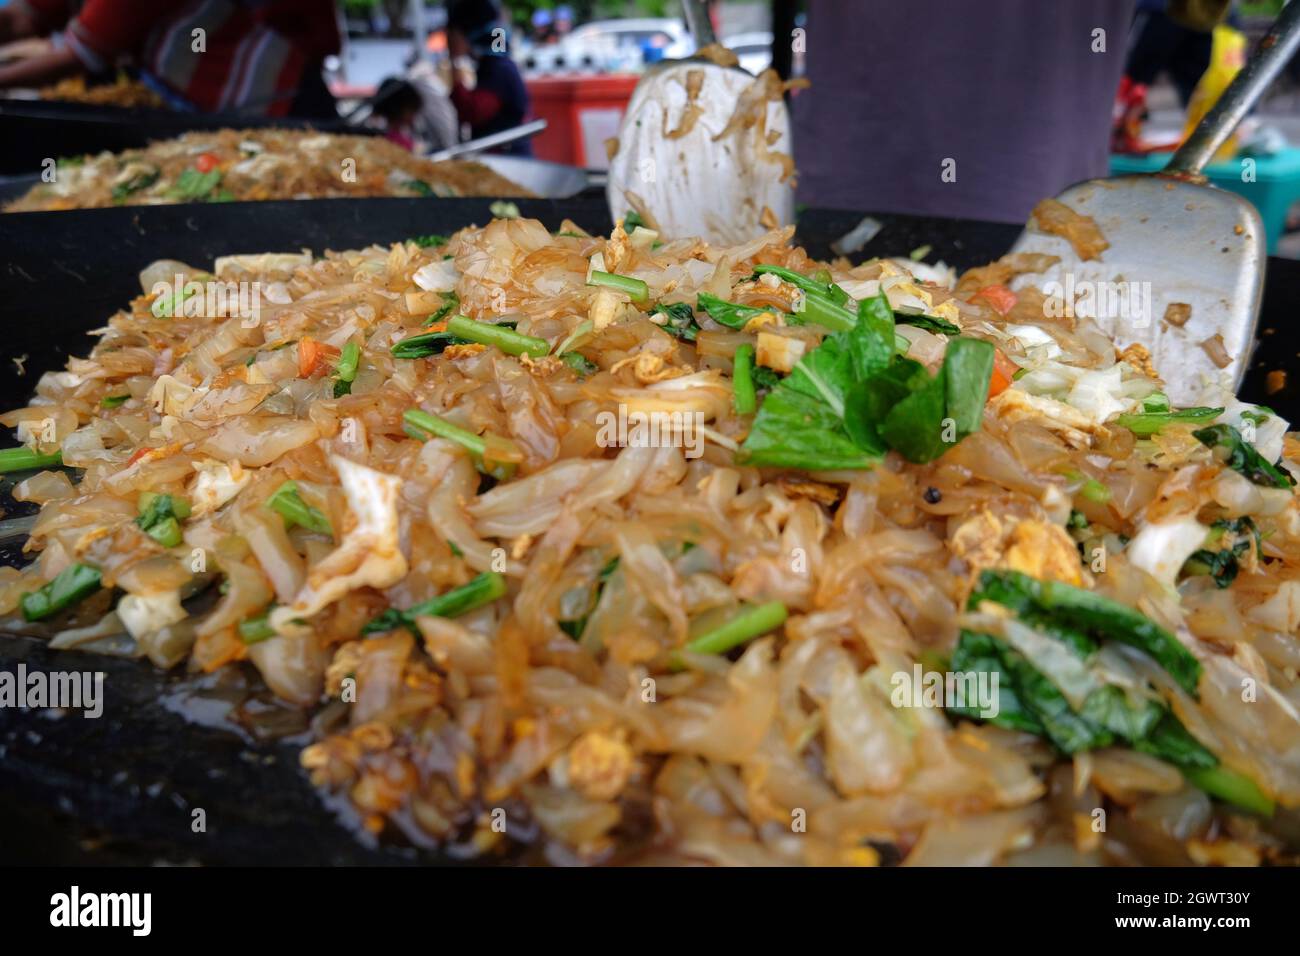 Close-up Of Food In Plate Stock Photo